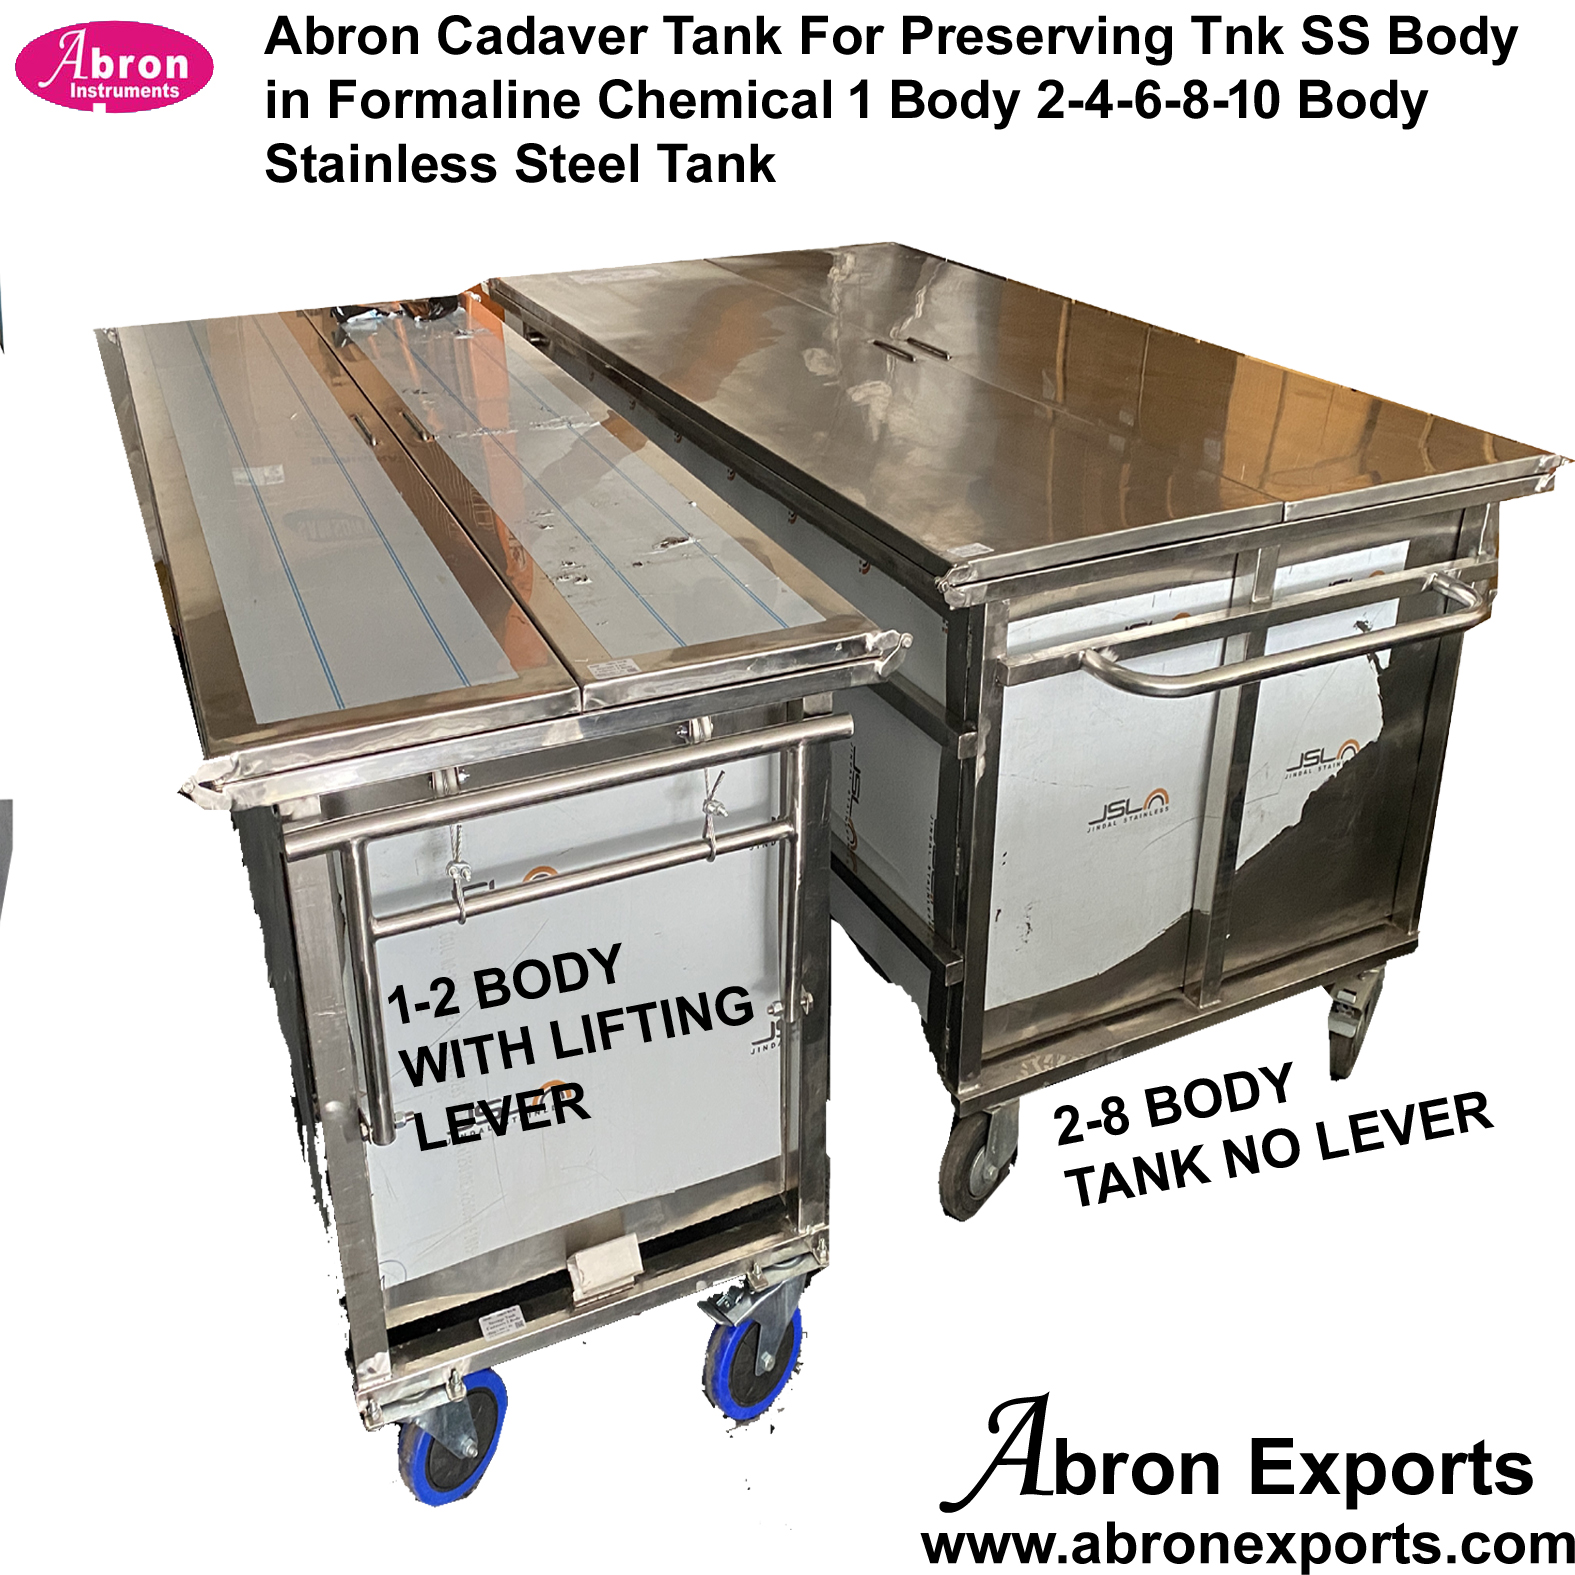 Cadaver tank 2 body-4-8-10-8 body stainless steel with top cover and wheels ss abron ABM-3550CS10